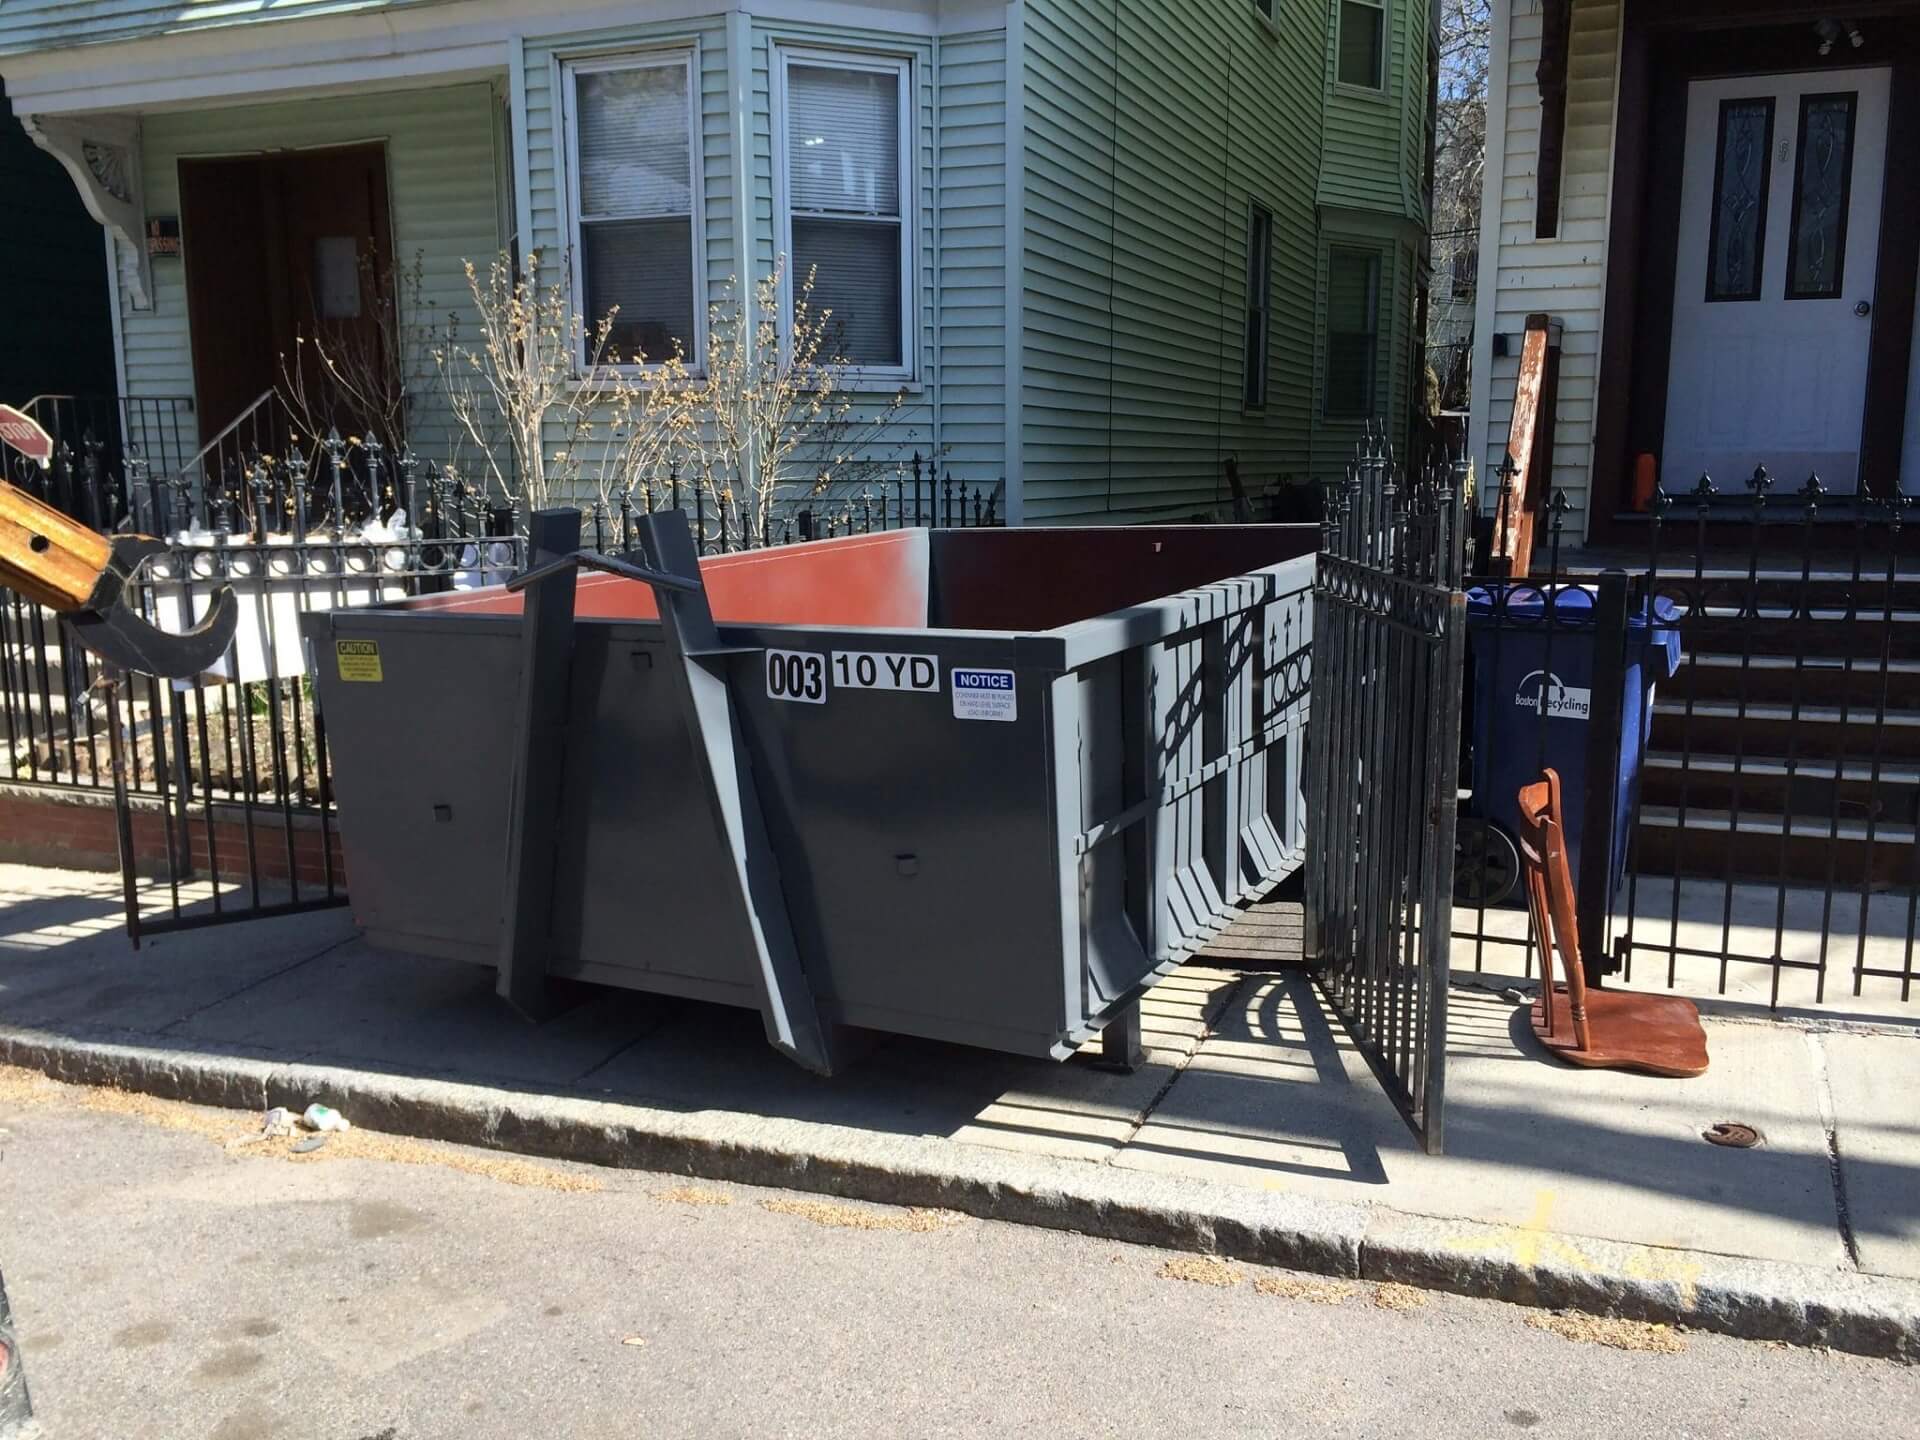 Spring Cleaning Dumpster Services-Greeley’s Premier Dumpster Rental & Roll Off Services